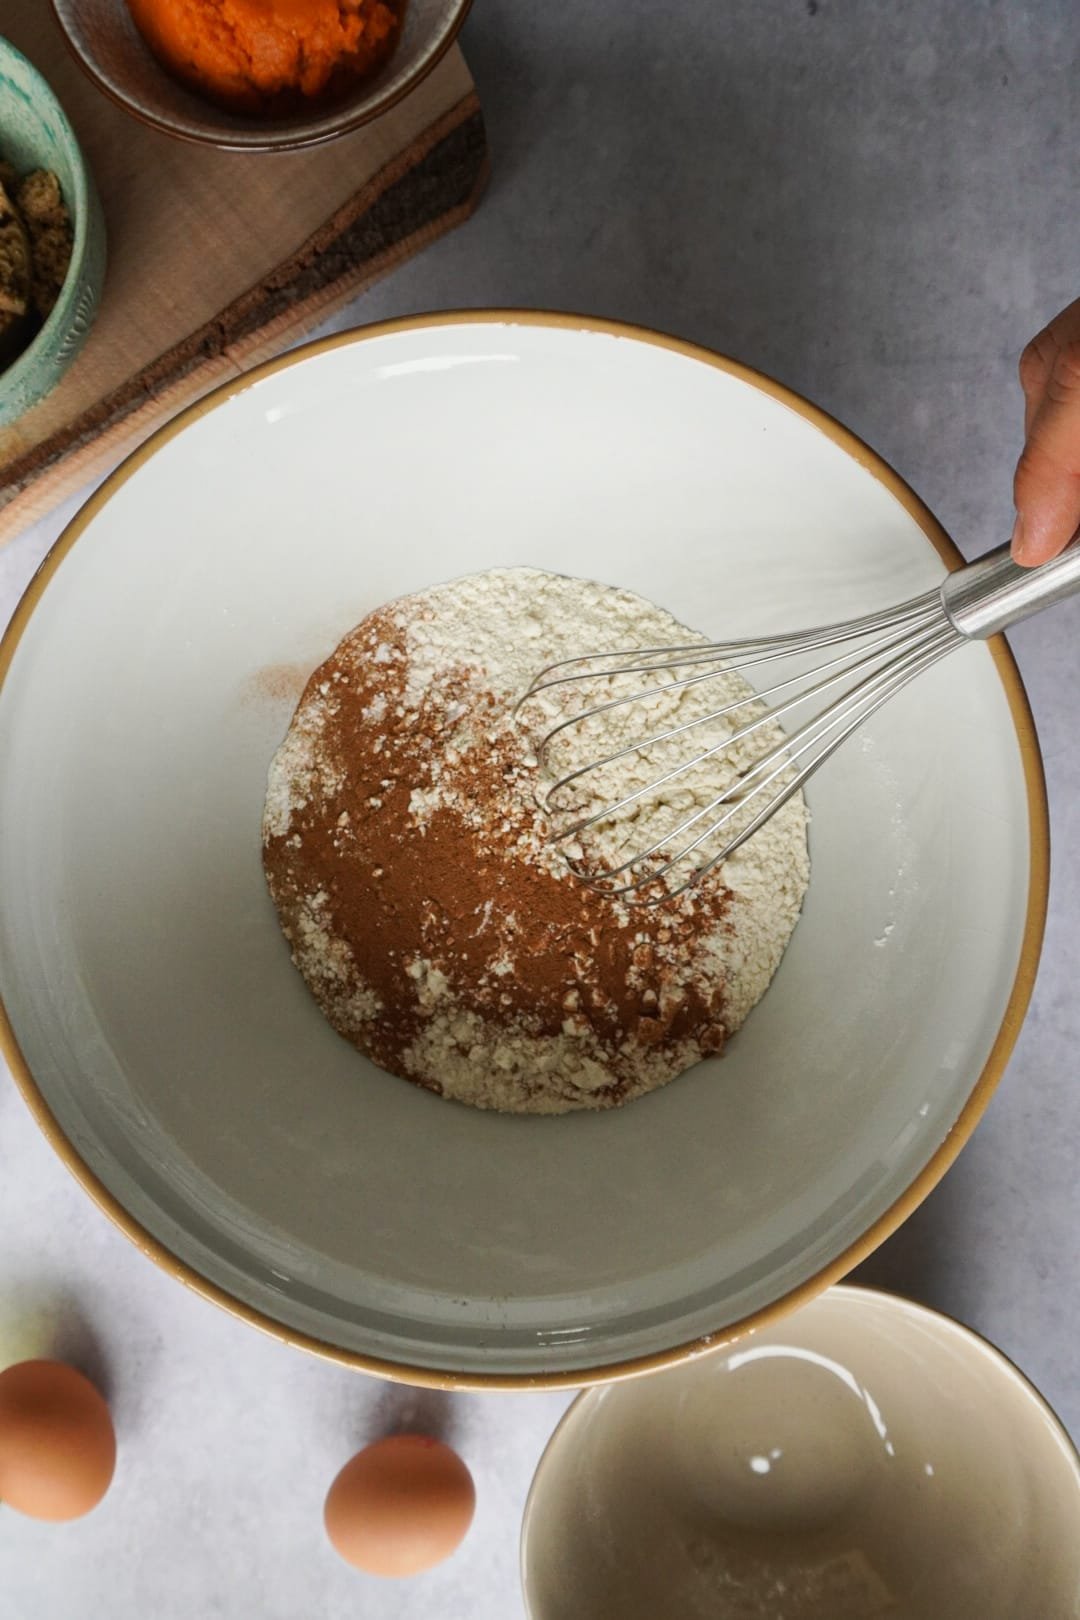 Then, mix all your dry ingredients together, separately, in a big bowl.